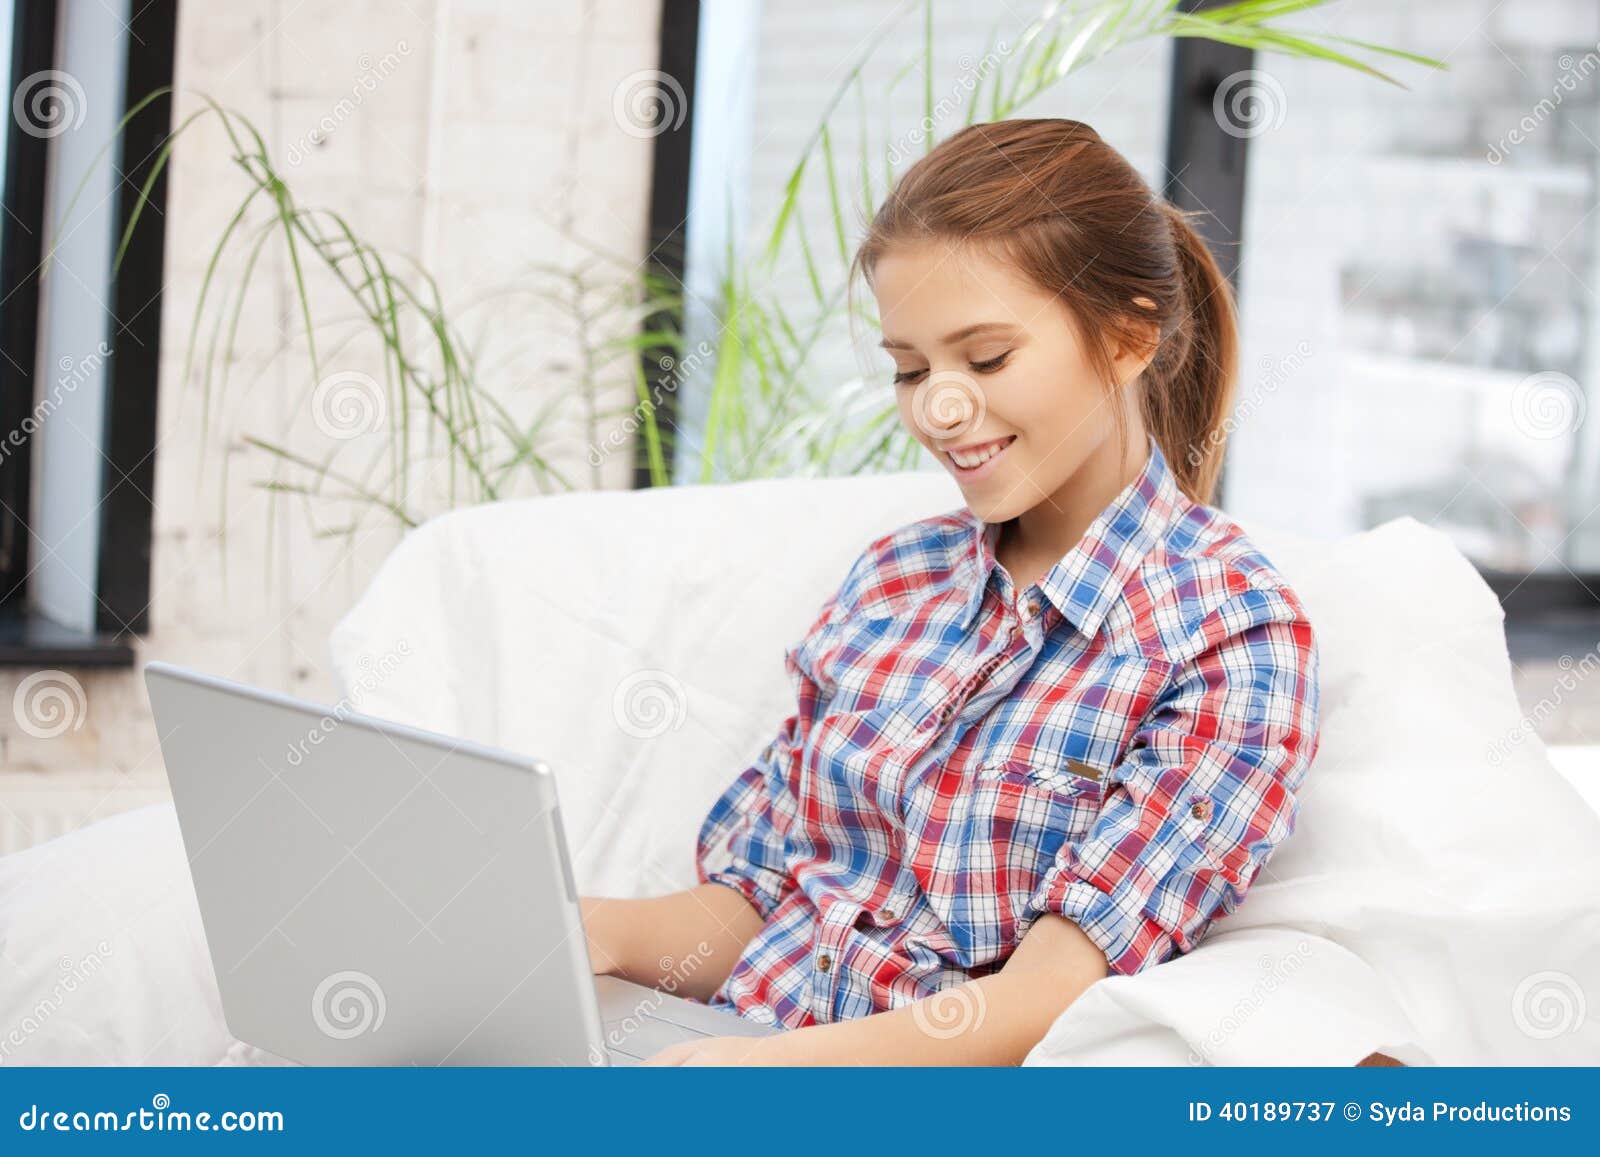 Happy Woman with Laptop Computer Stock Image - Image of lovely, female ...